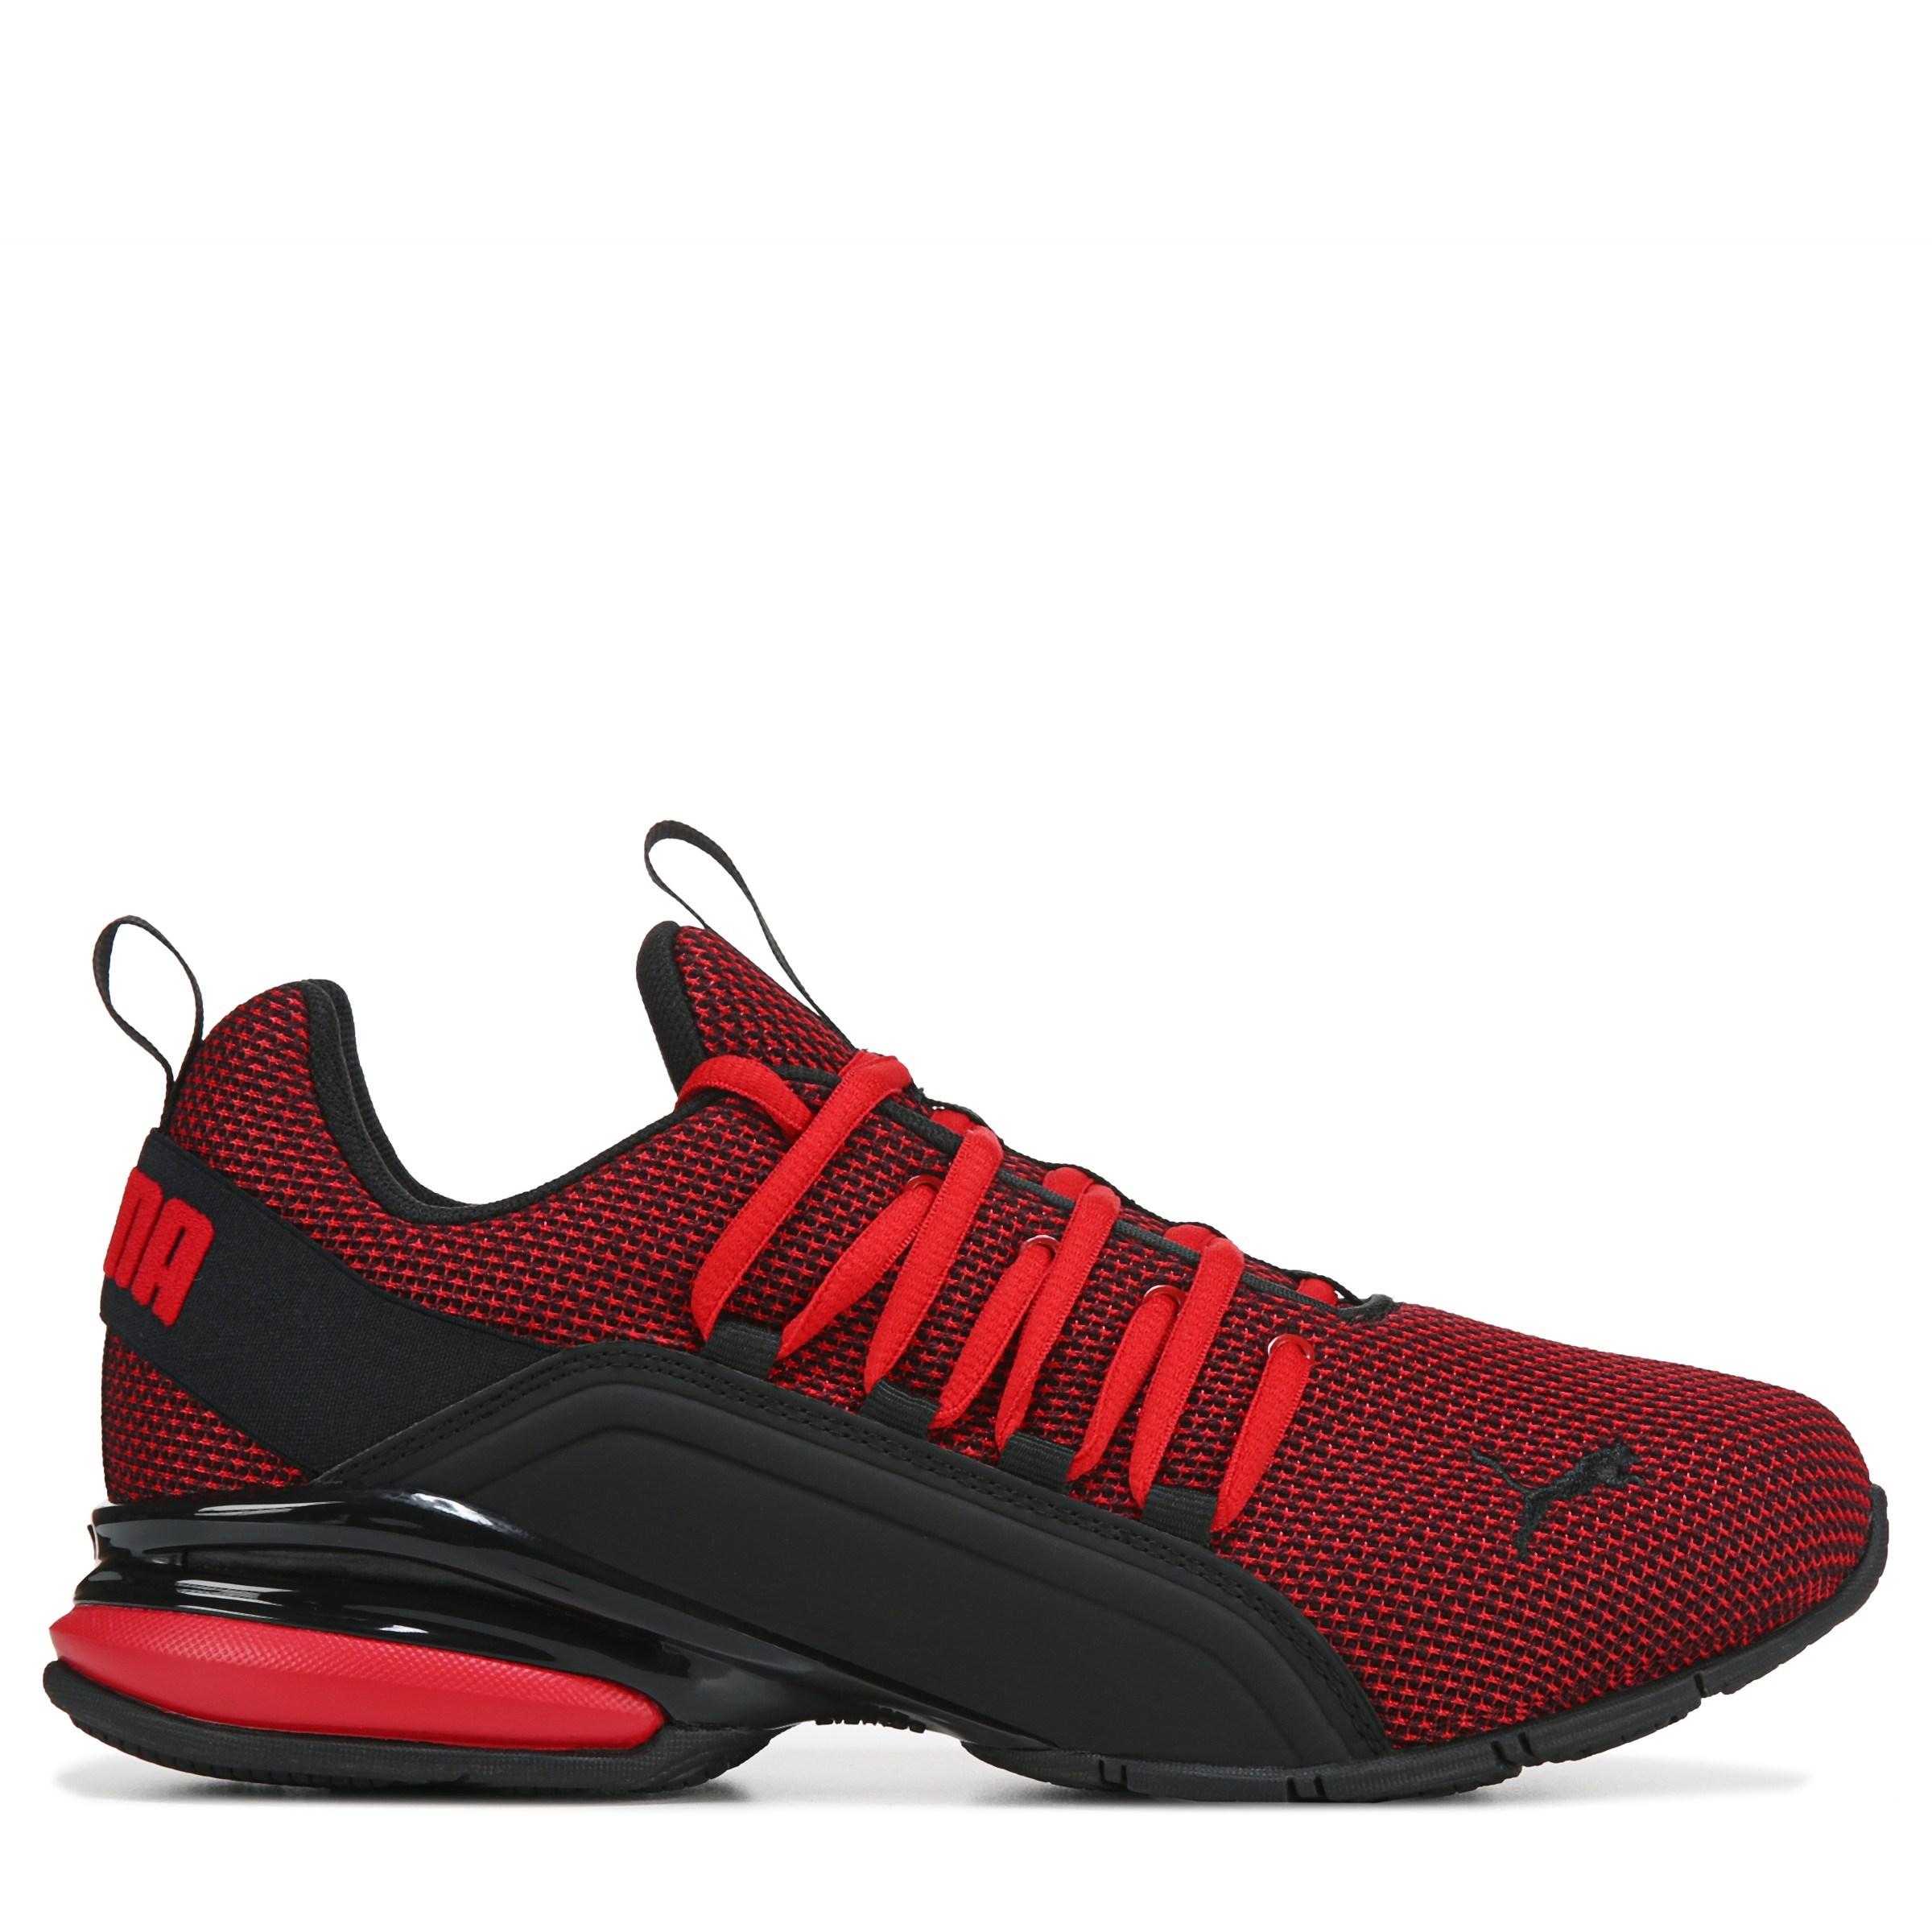 PUMA Axelion Wide Running Shoes in Red/Black (Red) for Men - Lyst